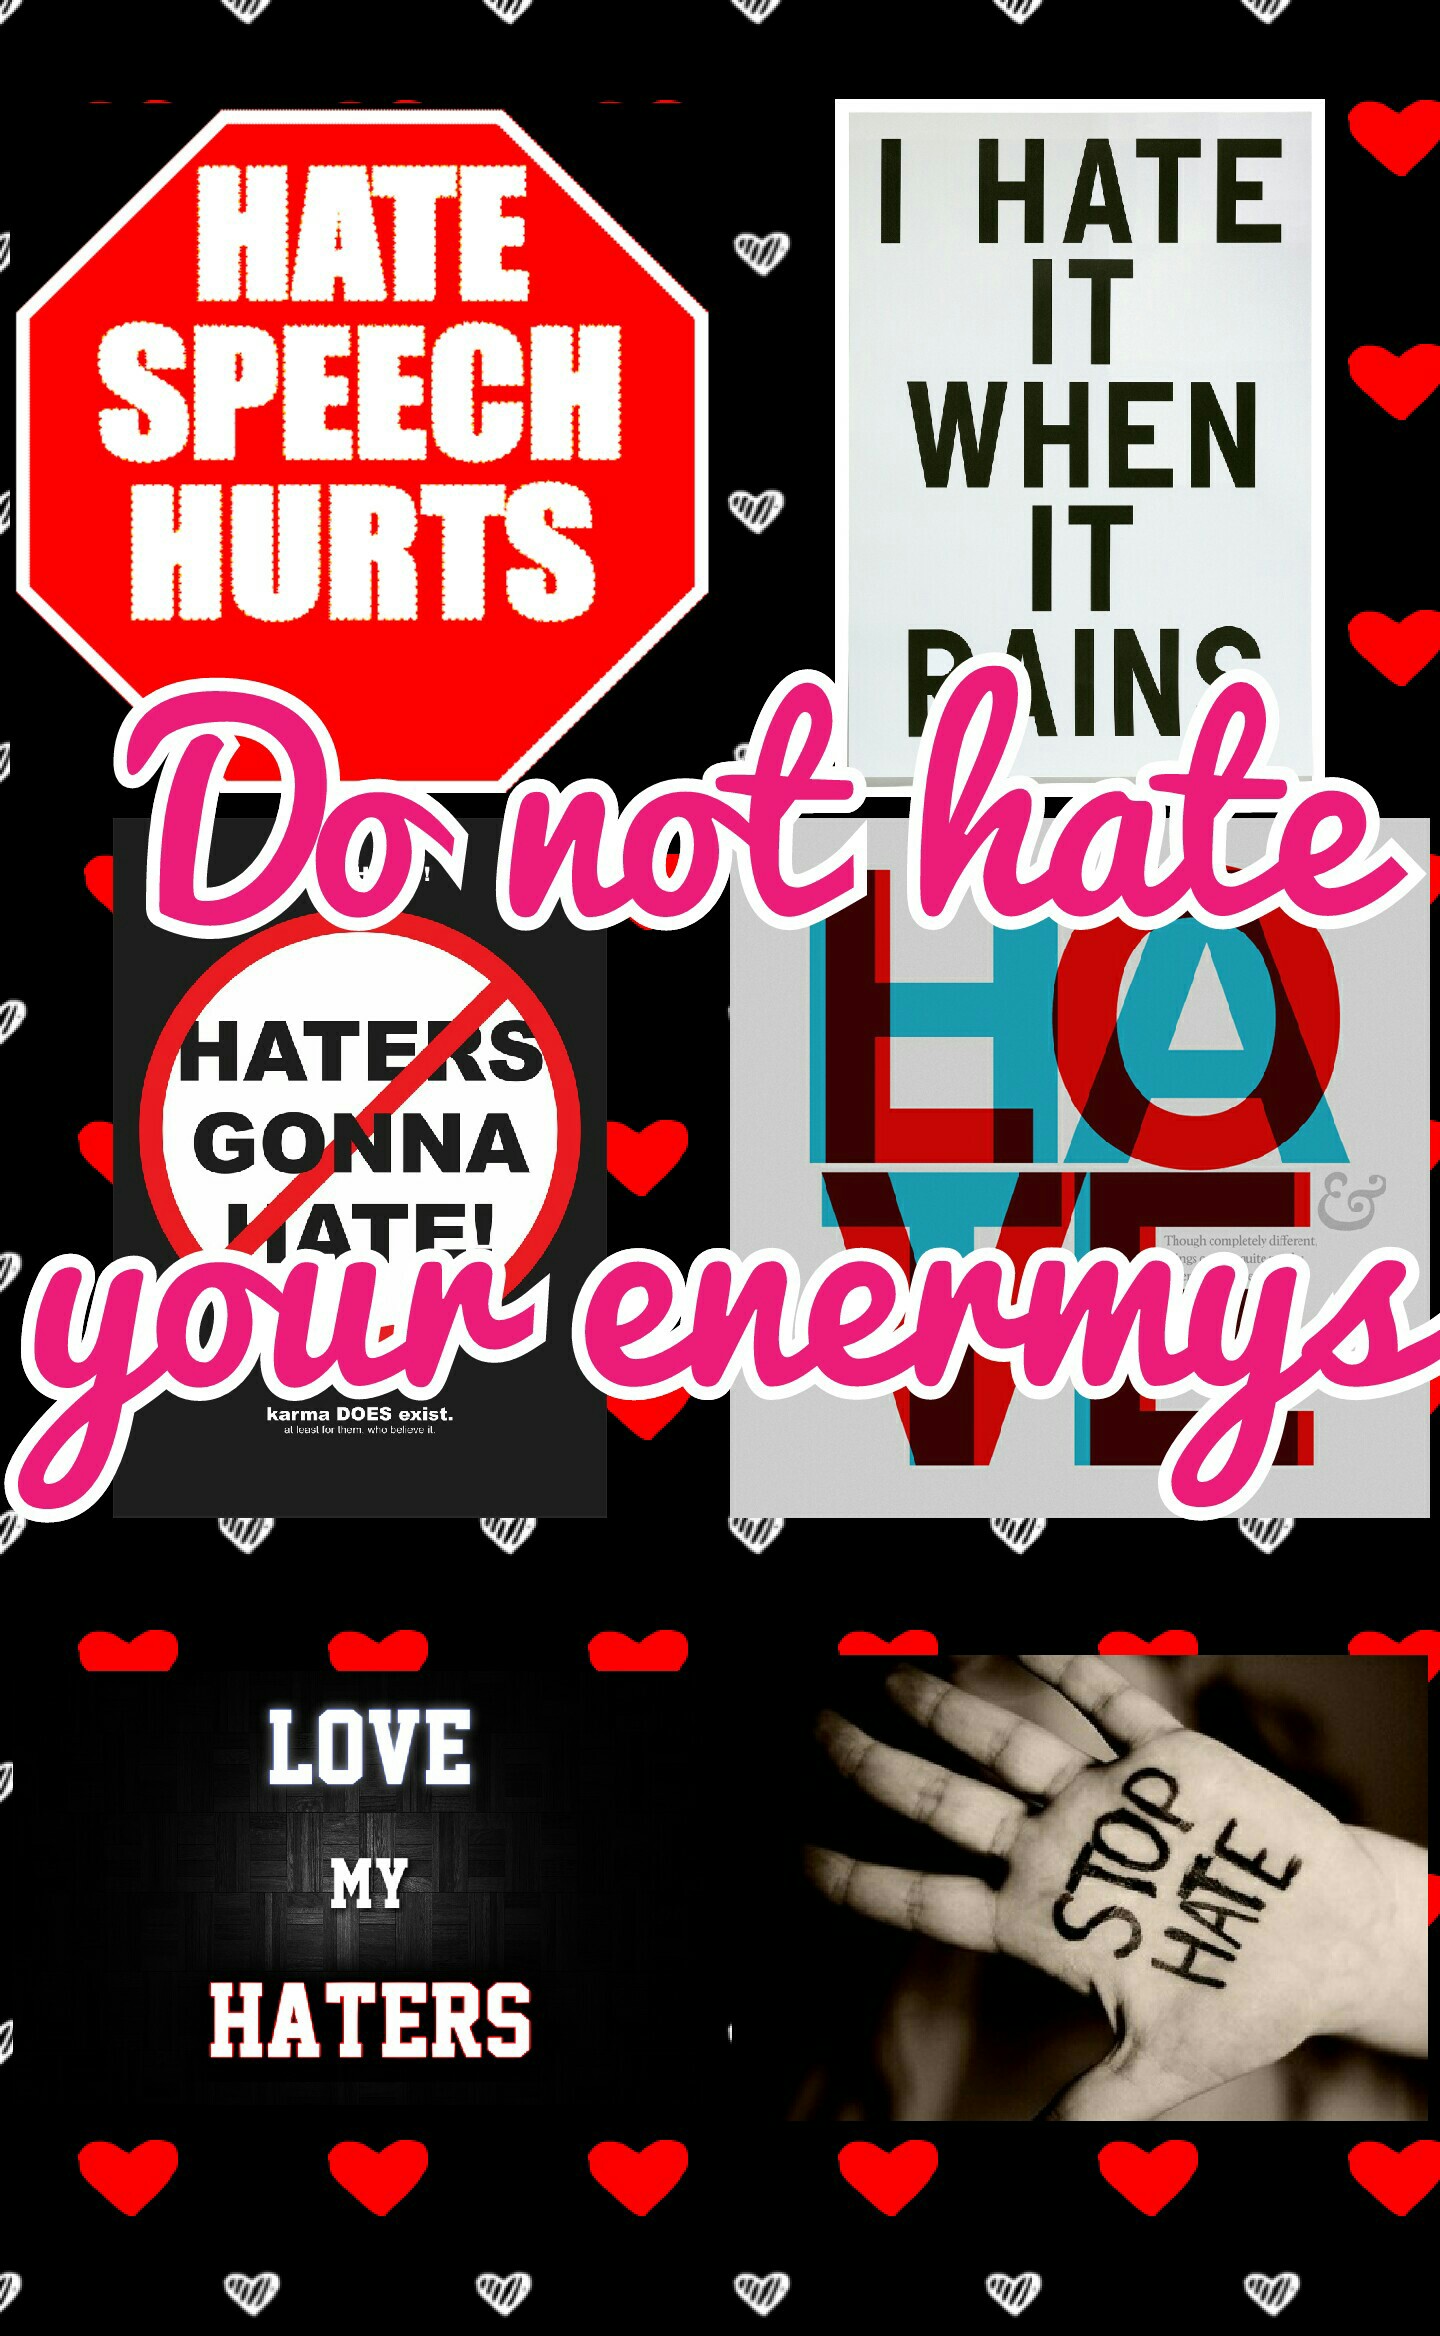 Do not hate
your enermys 